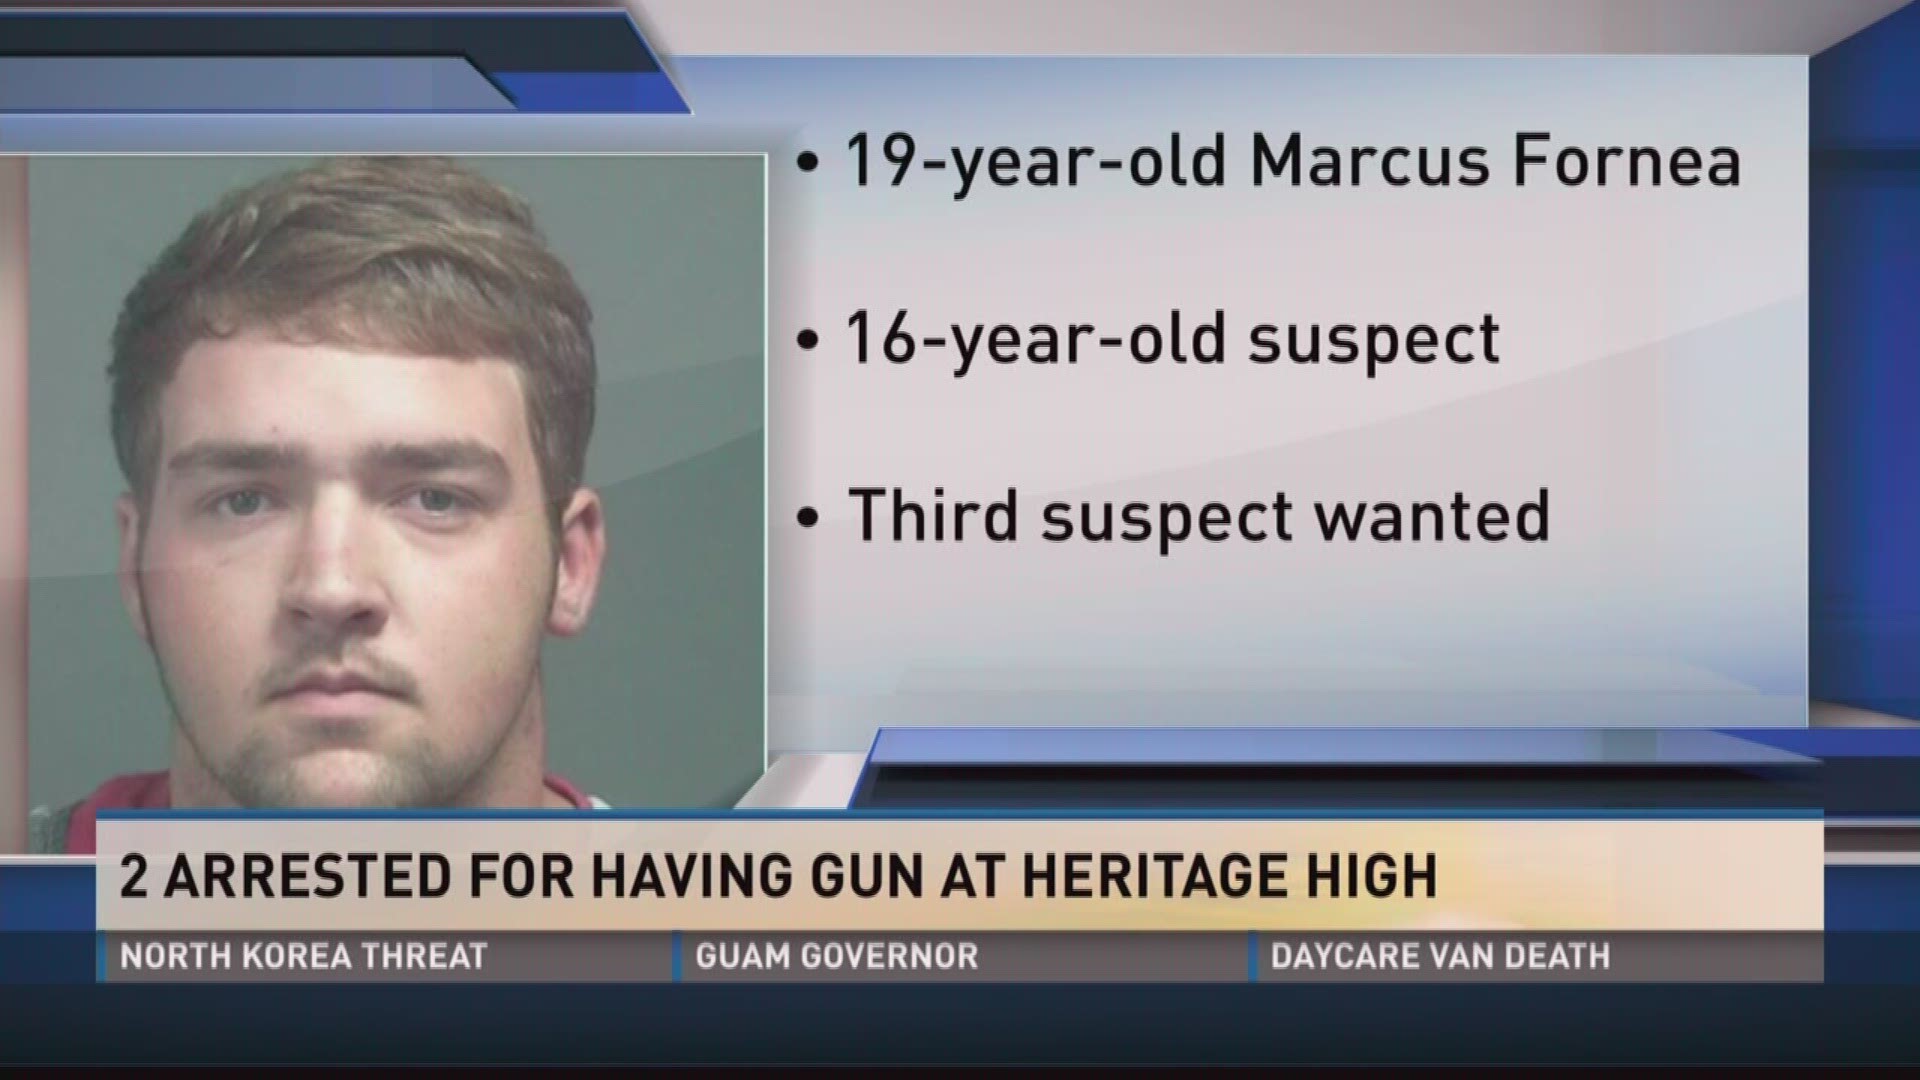 Two teenagers are accused of having a gun on the Heritage High School campus. Authorities are looking for a third suspect in connection.